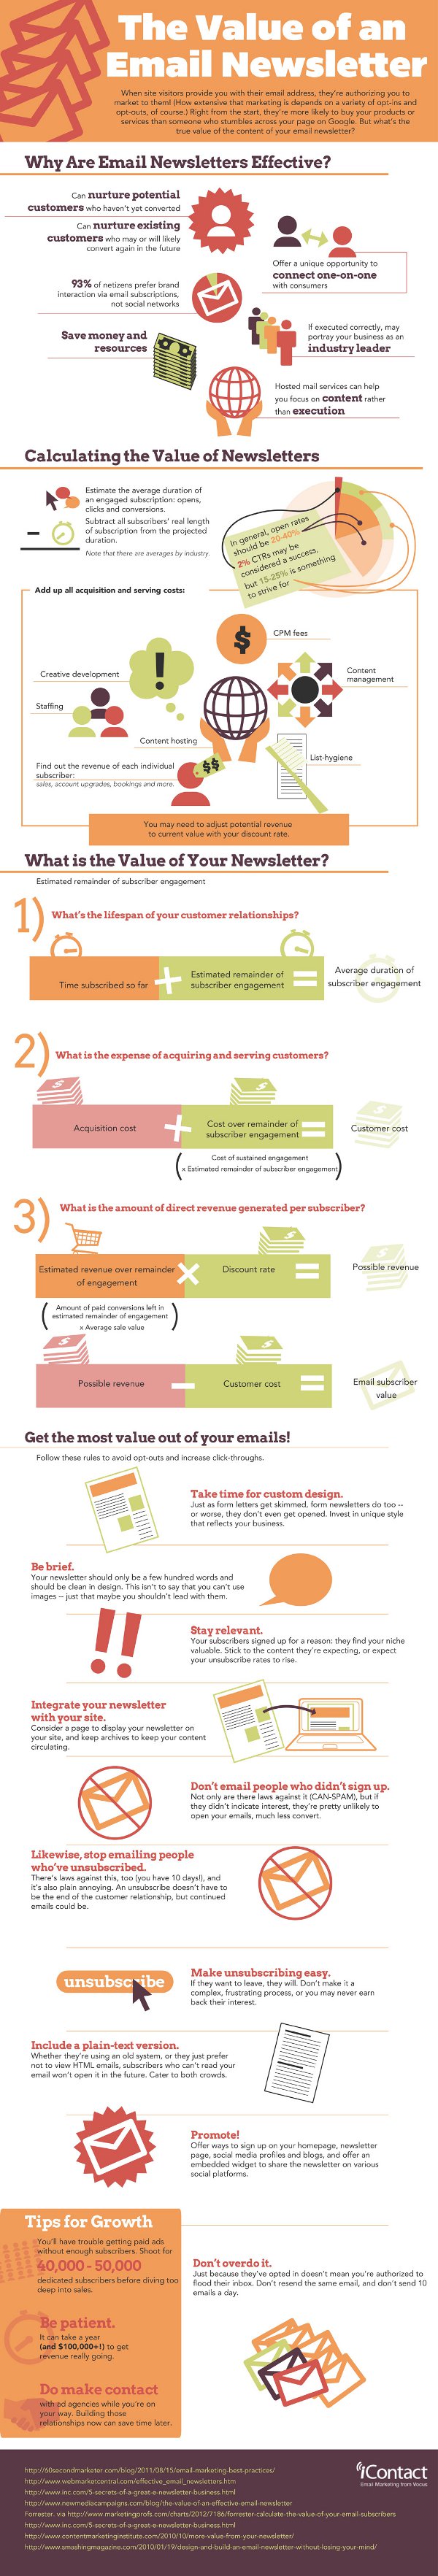 Email marketing graphic